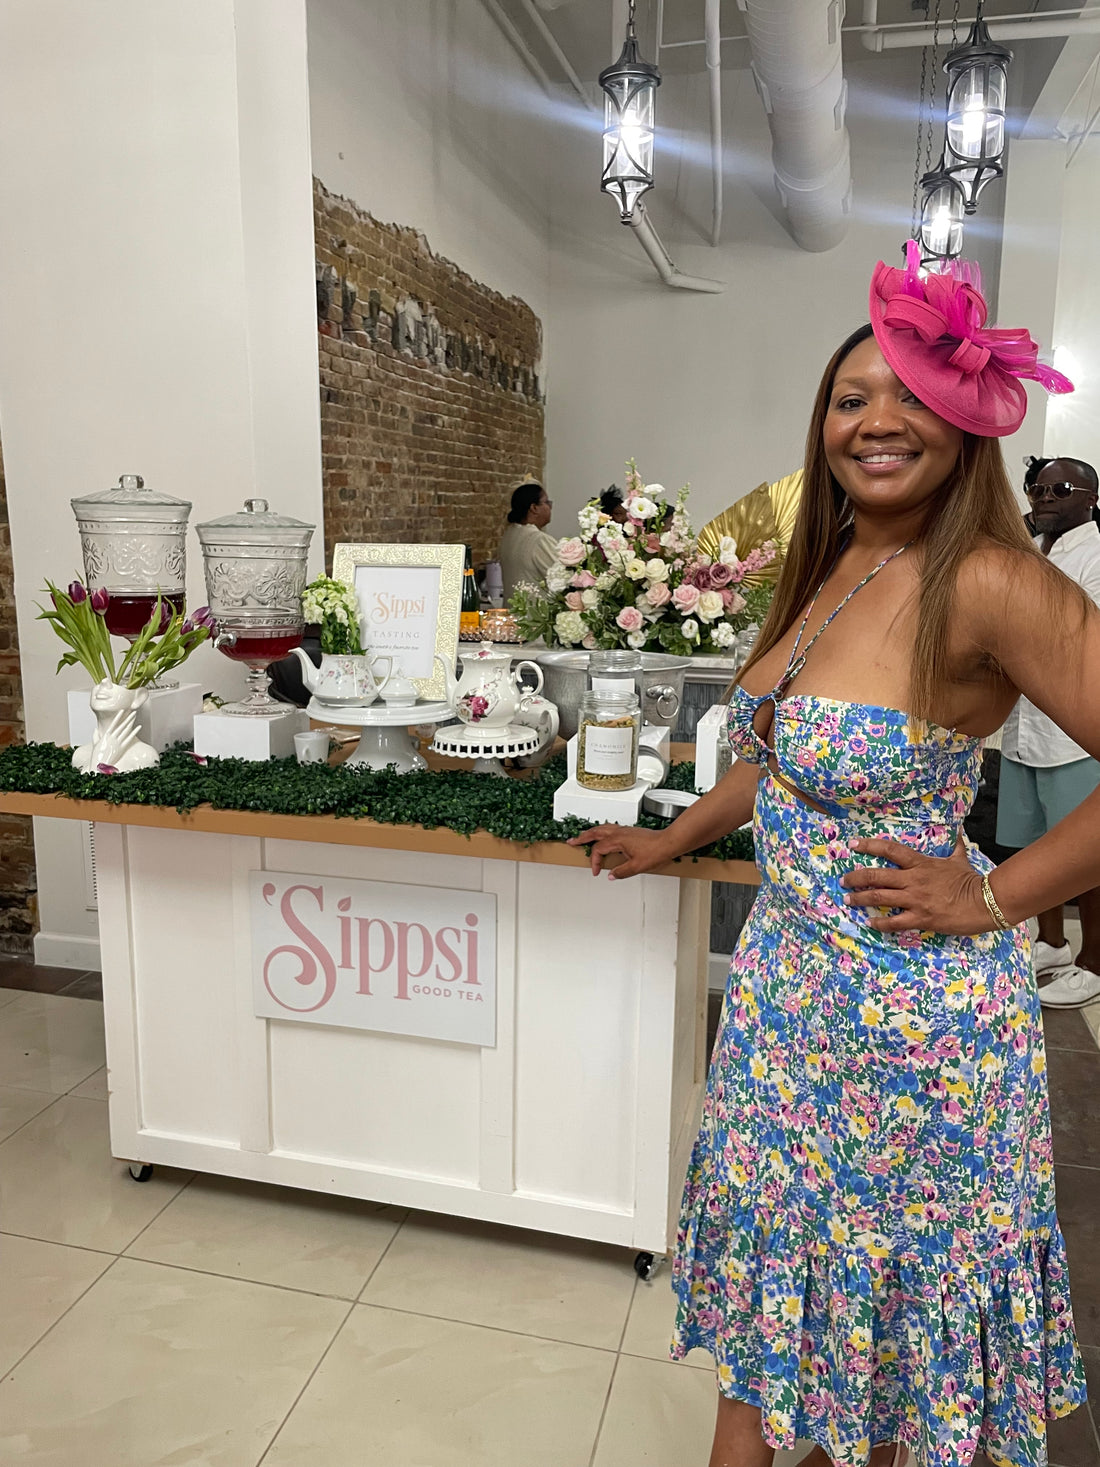 Sippsi Good Tea: Mississippi's Perfect Mobile Bar and Tea Experience for Summer Weddings and Festive Gatherings